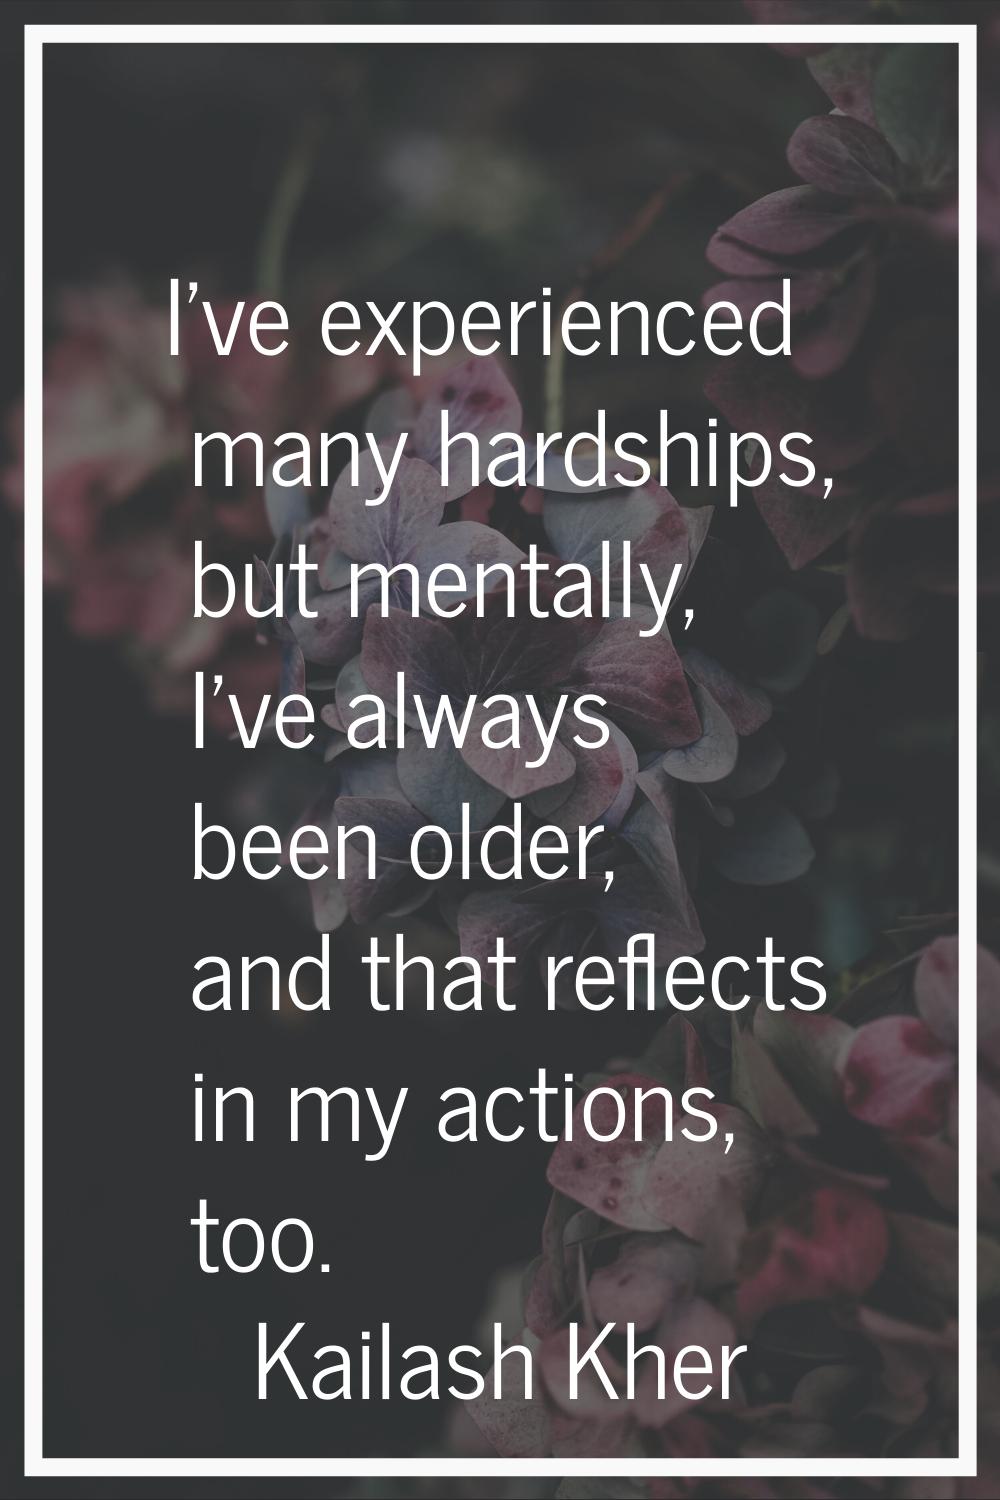 I've experienced many hardships, but mentally, I've always been older, and that reflects in my acti